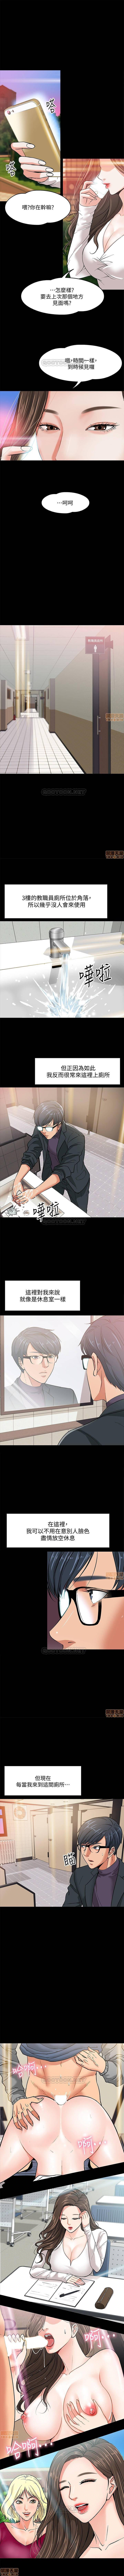 PROFESSOR, ARE YOU JUST GOING TO LOOK AT ME? | DESIRE SWAMP | 教授，你還等什麼? Ch. 2 [Chinese] Manhwa 7